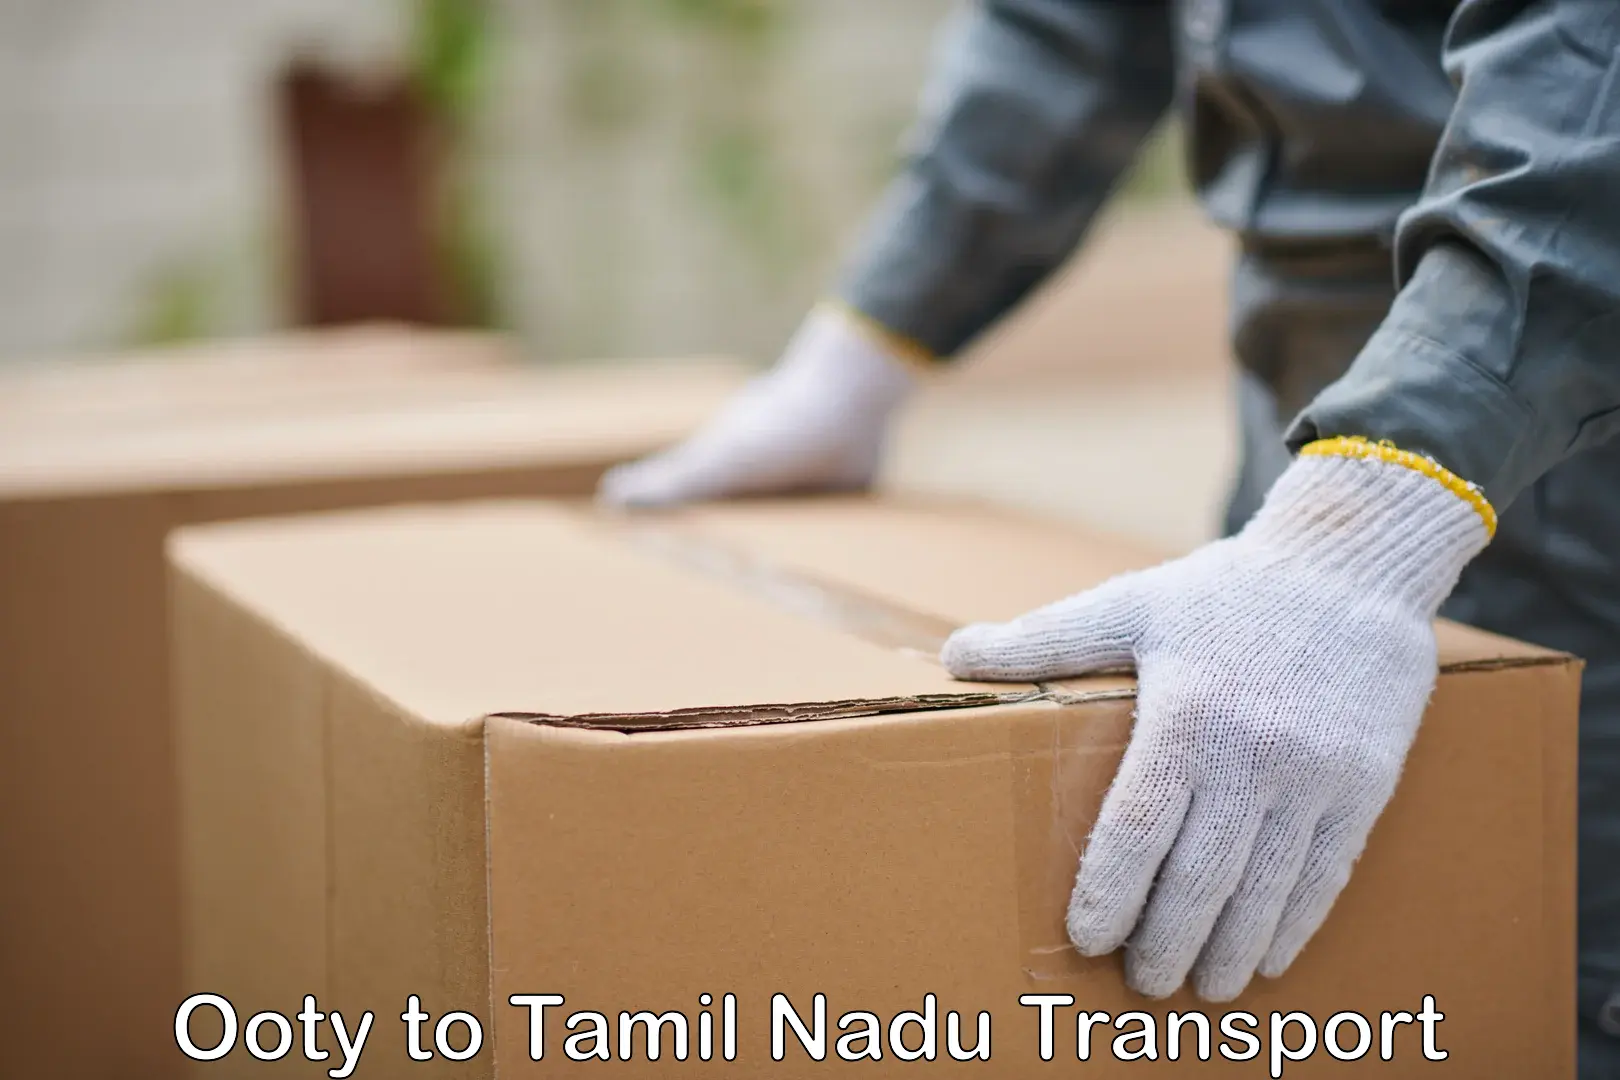 Nationwide transport services Ooty to Ooty